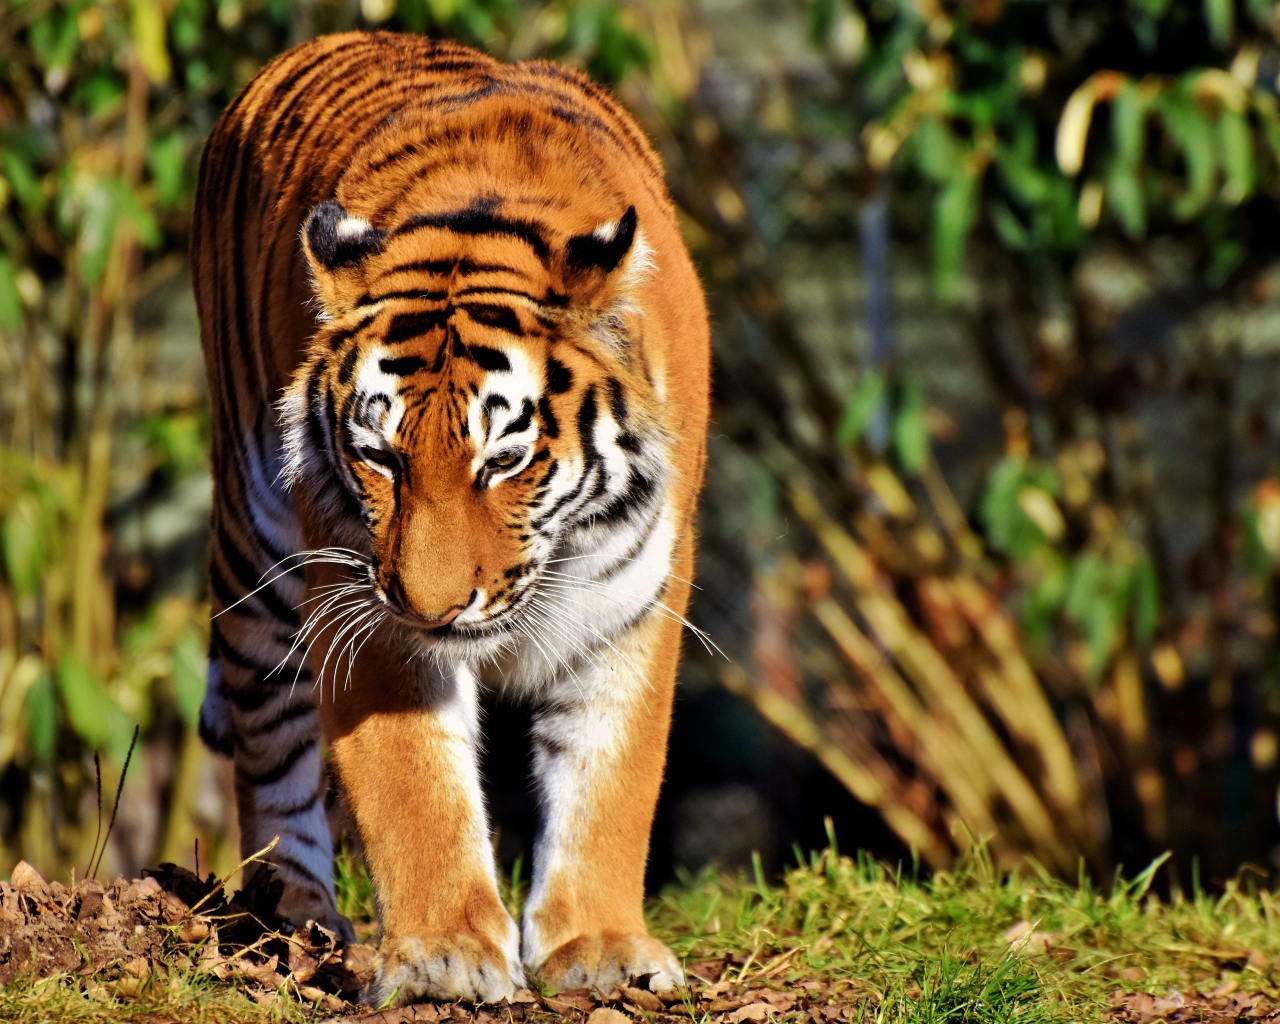 A large tiger with its head down goes on the green grass